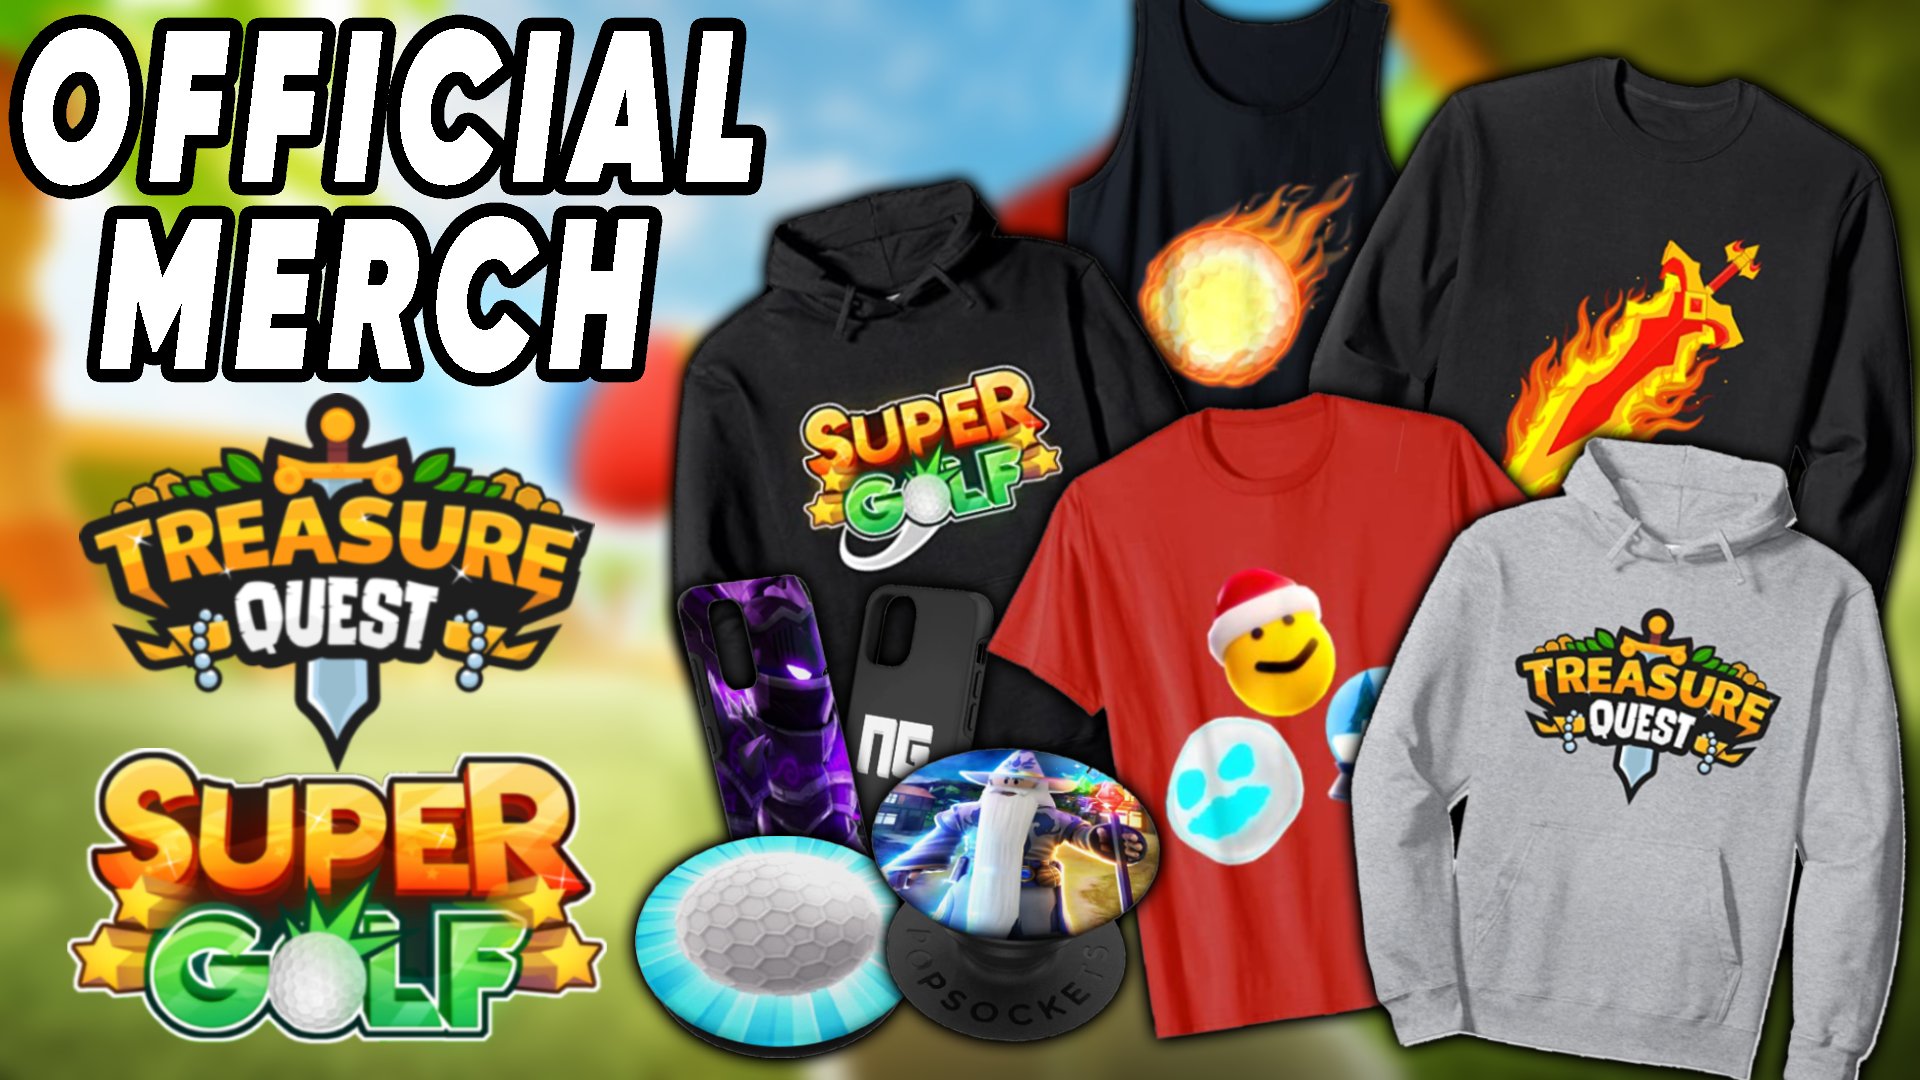 Nosniy ‌‌ on X: Excited to announce we now have OFFICIAL MERCH on the  Roblox  store for Treasure Quest and Super Golf! 🎉 Thanks @Roblox  for the amazing opportunity! Check out